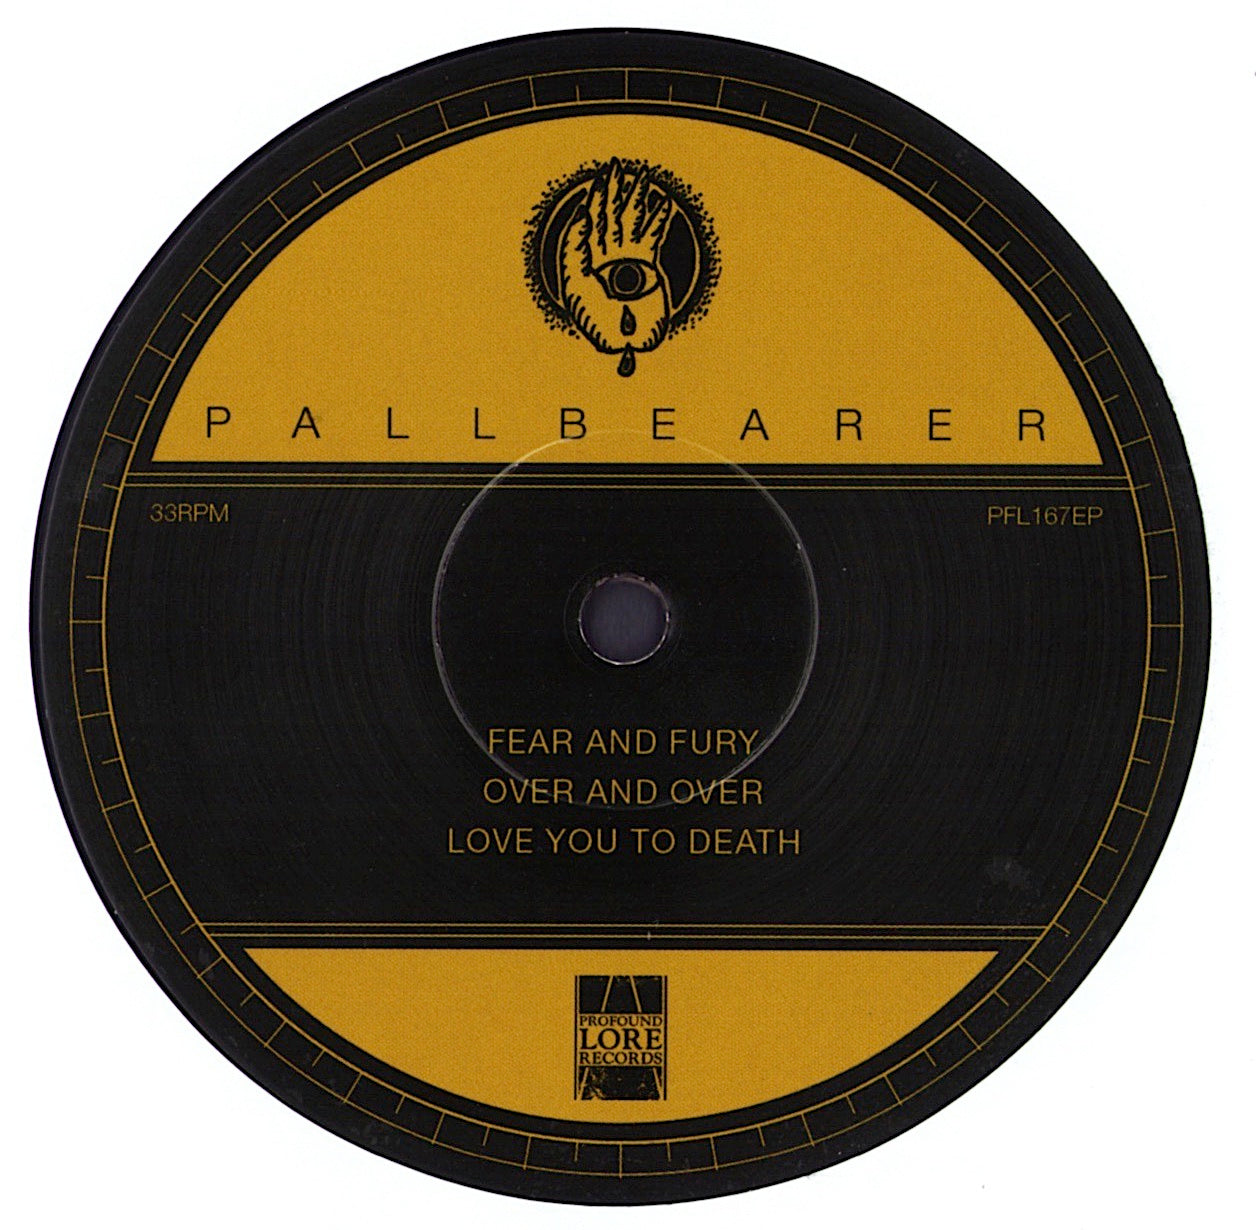 Pallbearer – Fear And Fury Vinyl 12" EP Limited Edition